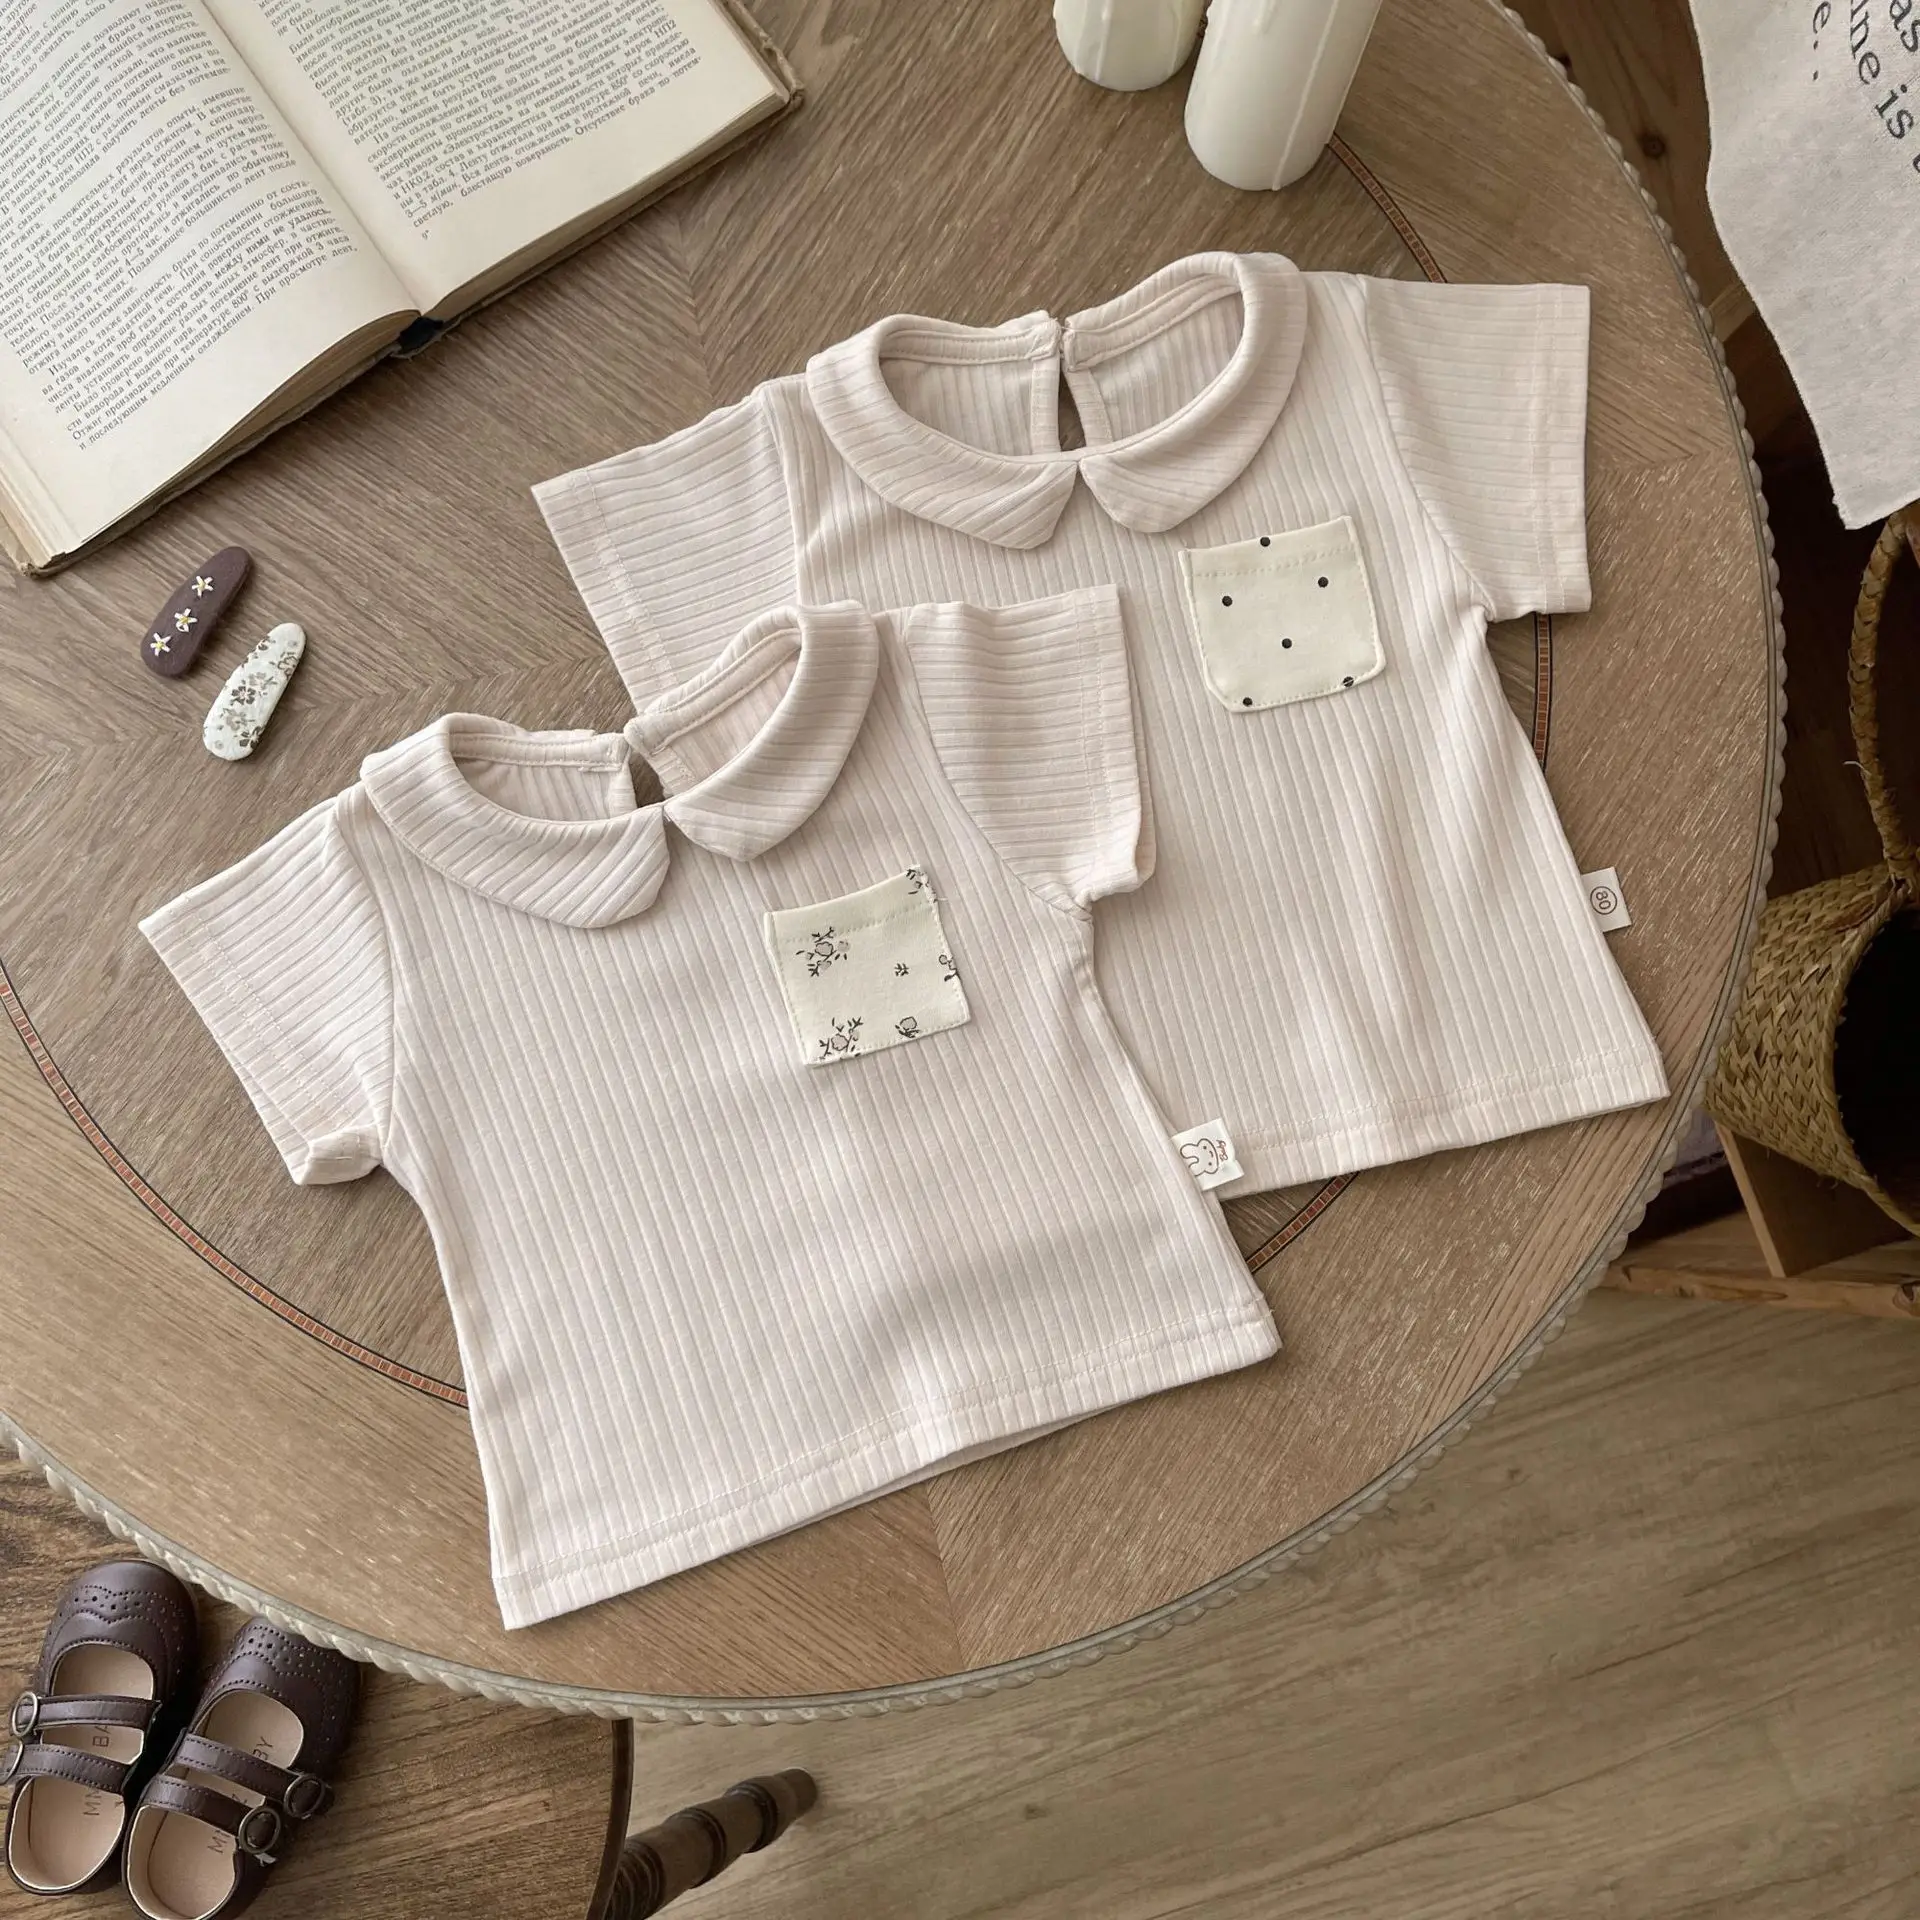 2023 New Cute Baby Summer Short Sleeve T Shirts Infant Cotton T Shirt For Boy Girl Tee Fashion Kids Clothes